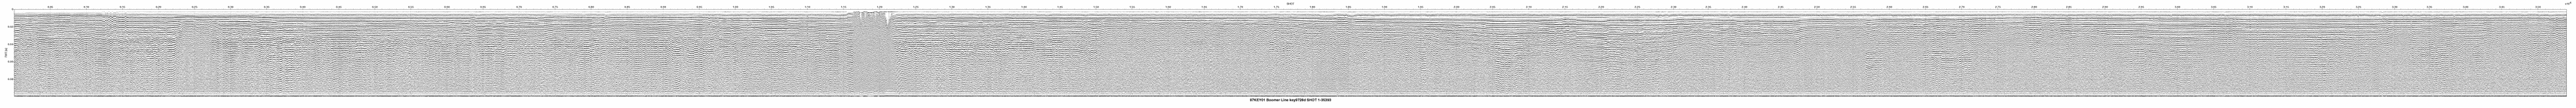 Thumbnail GIF image of the seismic trackline key9728d, with a hotlink to the more detailed, larger JPG image.